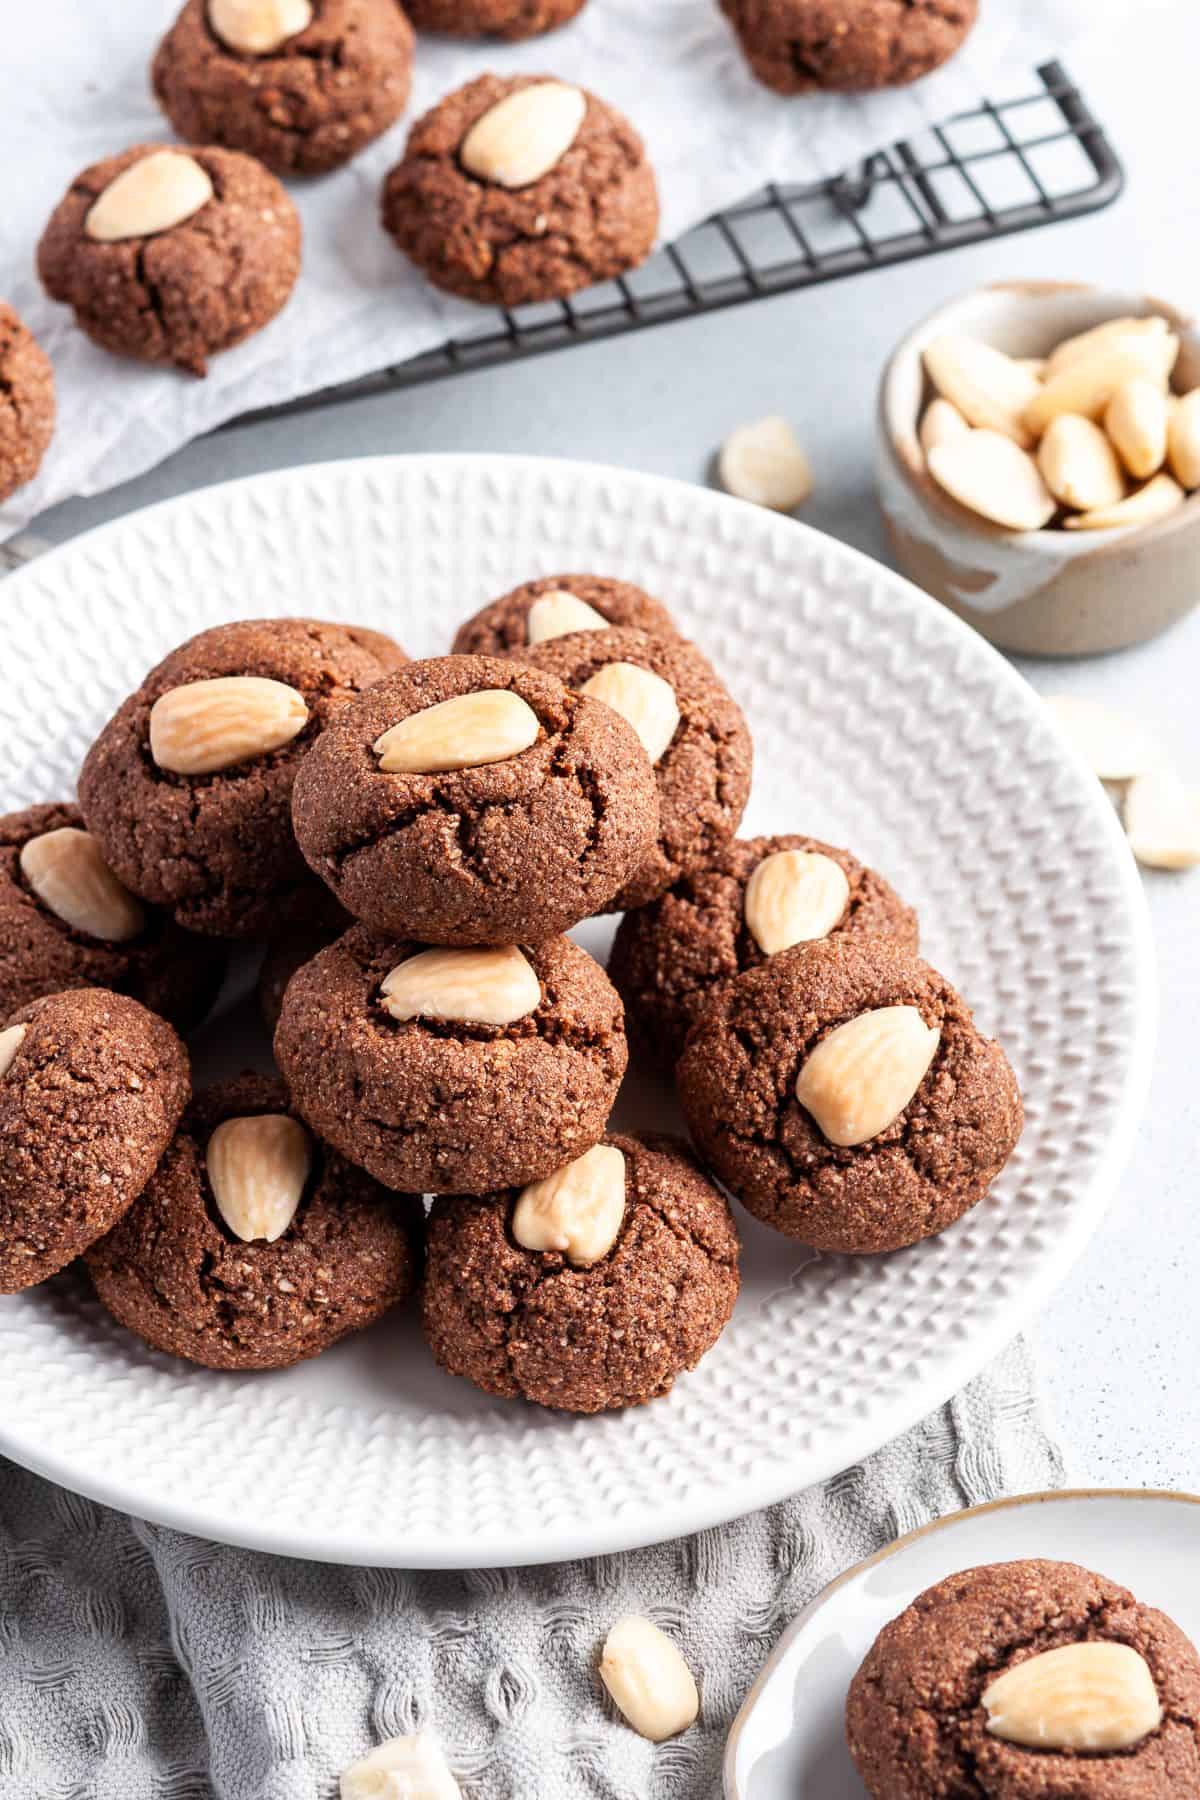 Round white plate with chocolate almond cookies, sitting on a grey cloth.